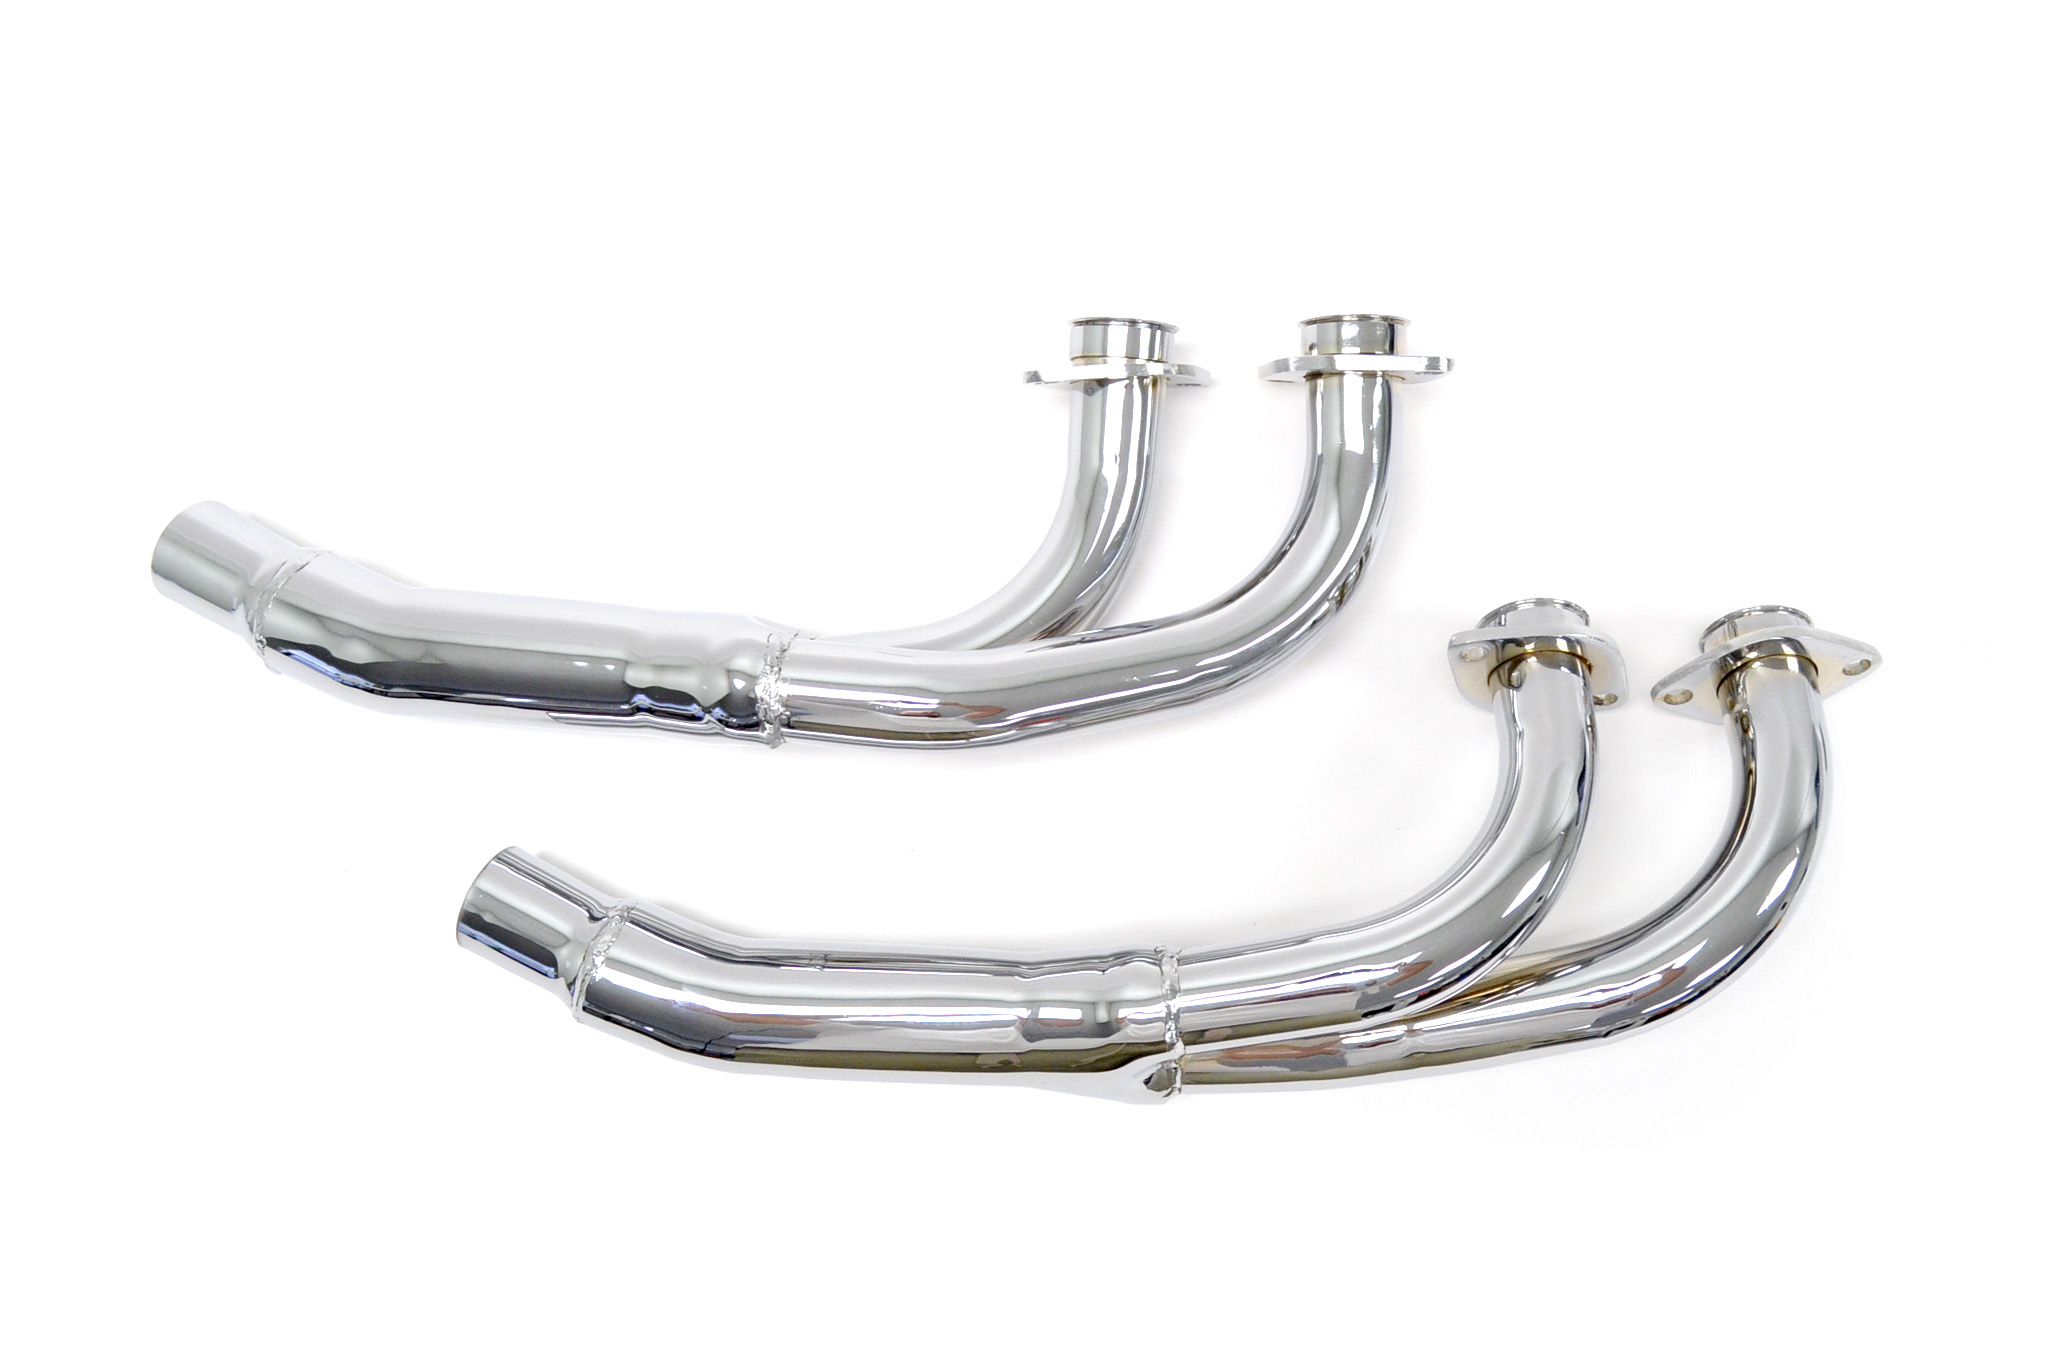 Honda goldwing exhaust pipes #4